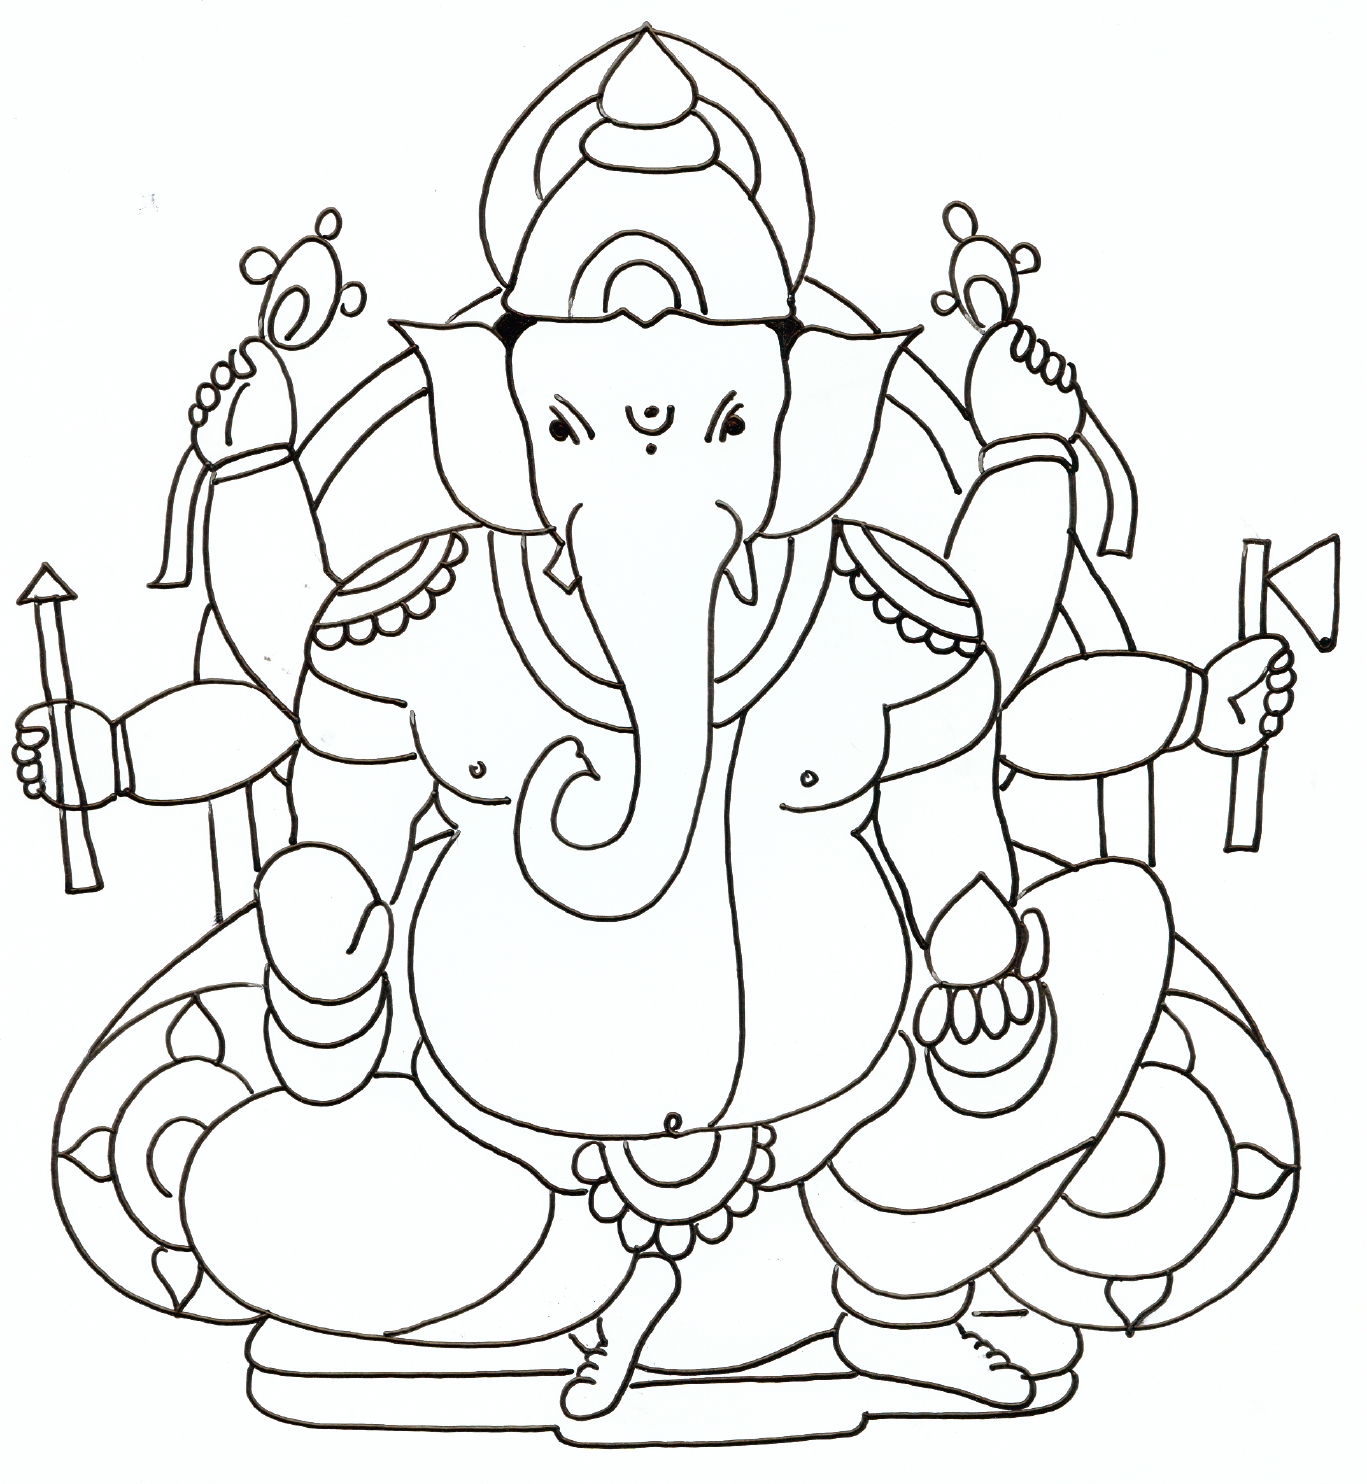 Free Ganesh Drawings, Download Free Ganesh Drawings png images, Free  ClipArts on Clipart Library